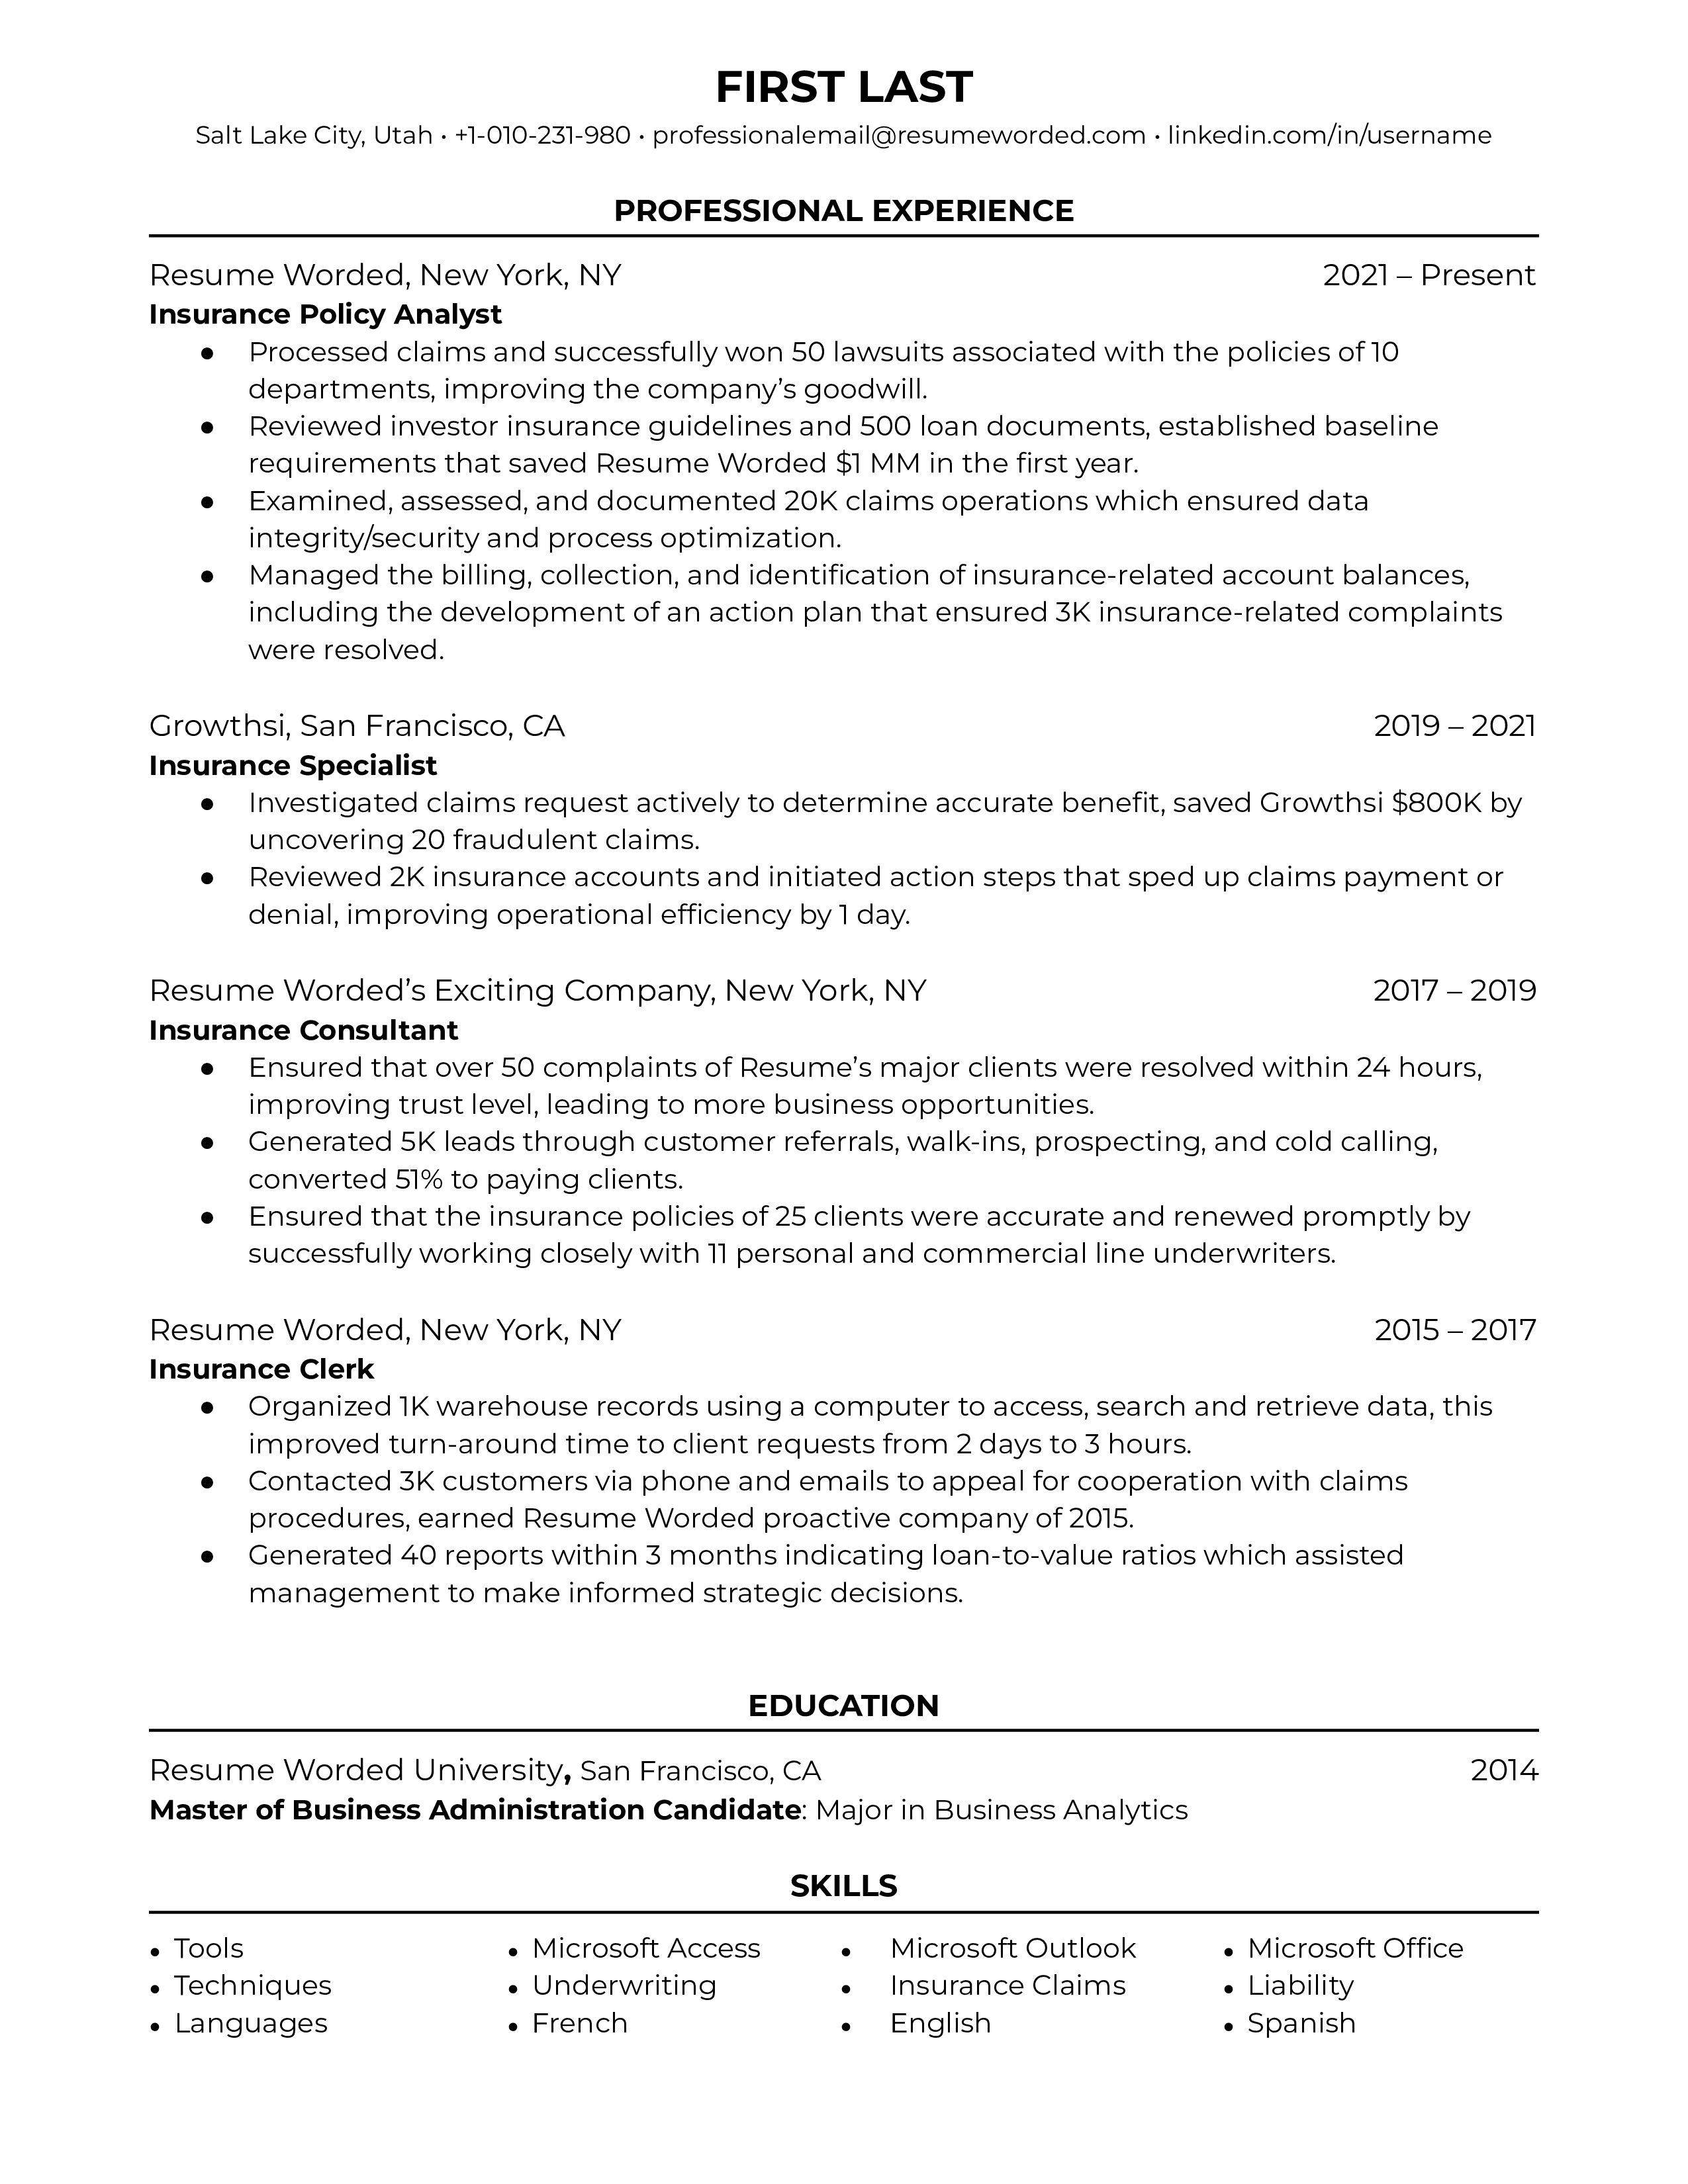 Insurance Policy Analyst Resume Sample